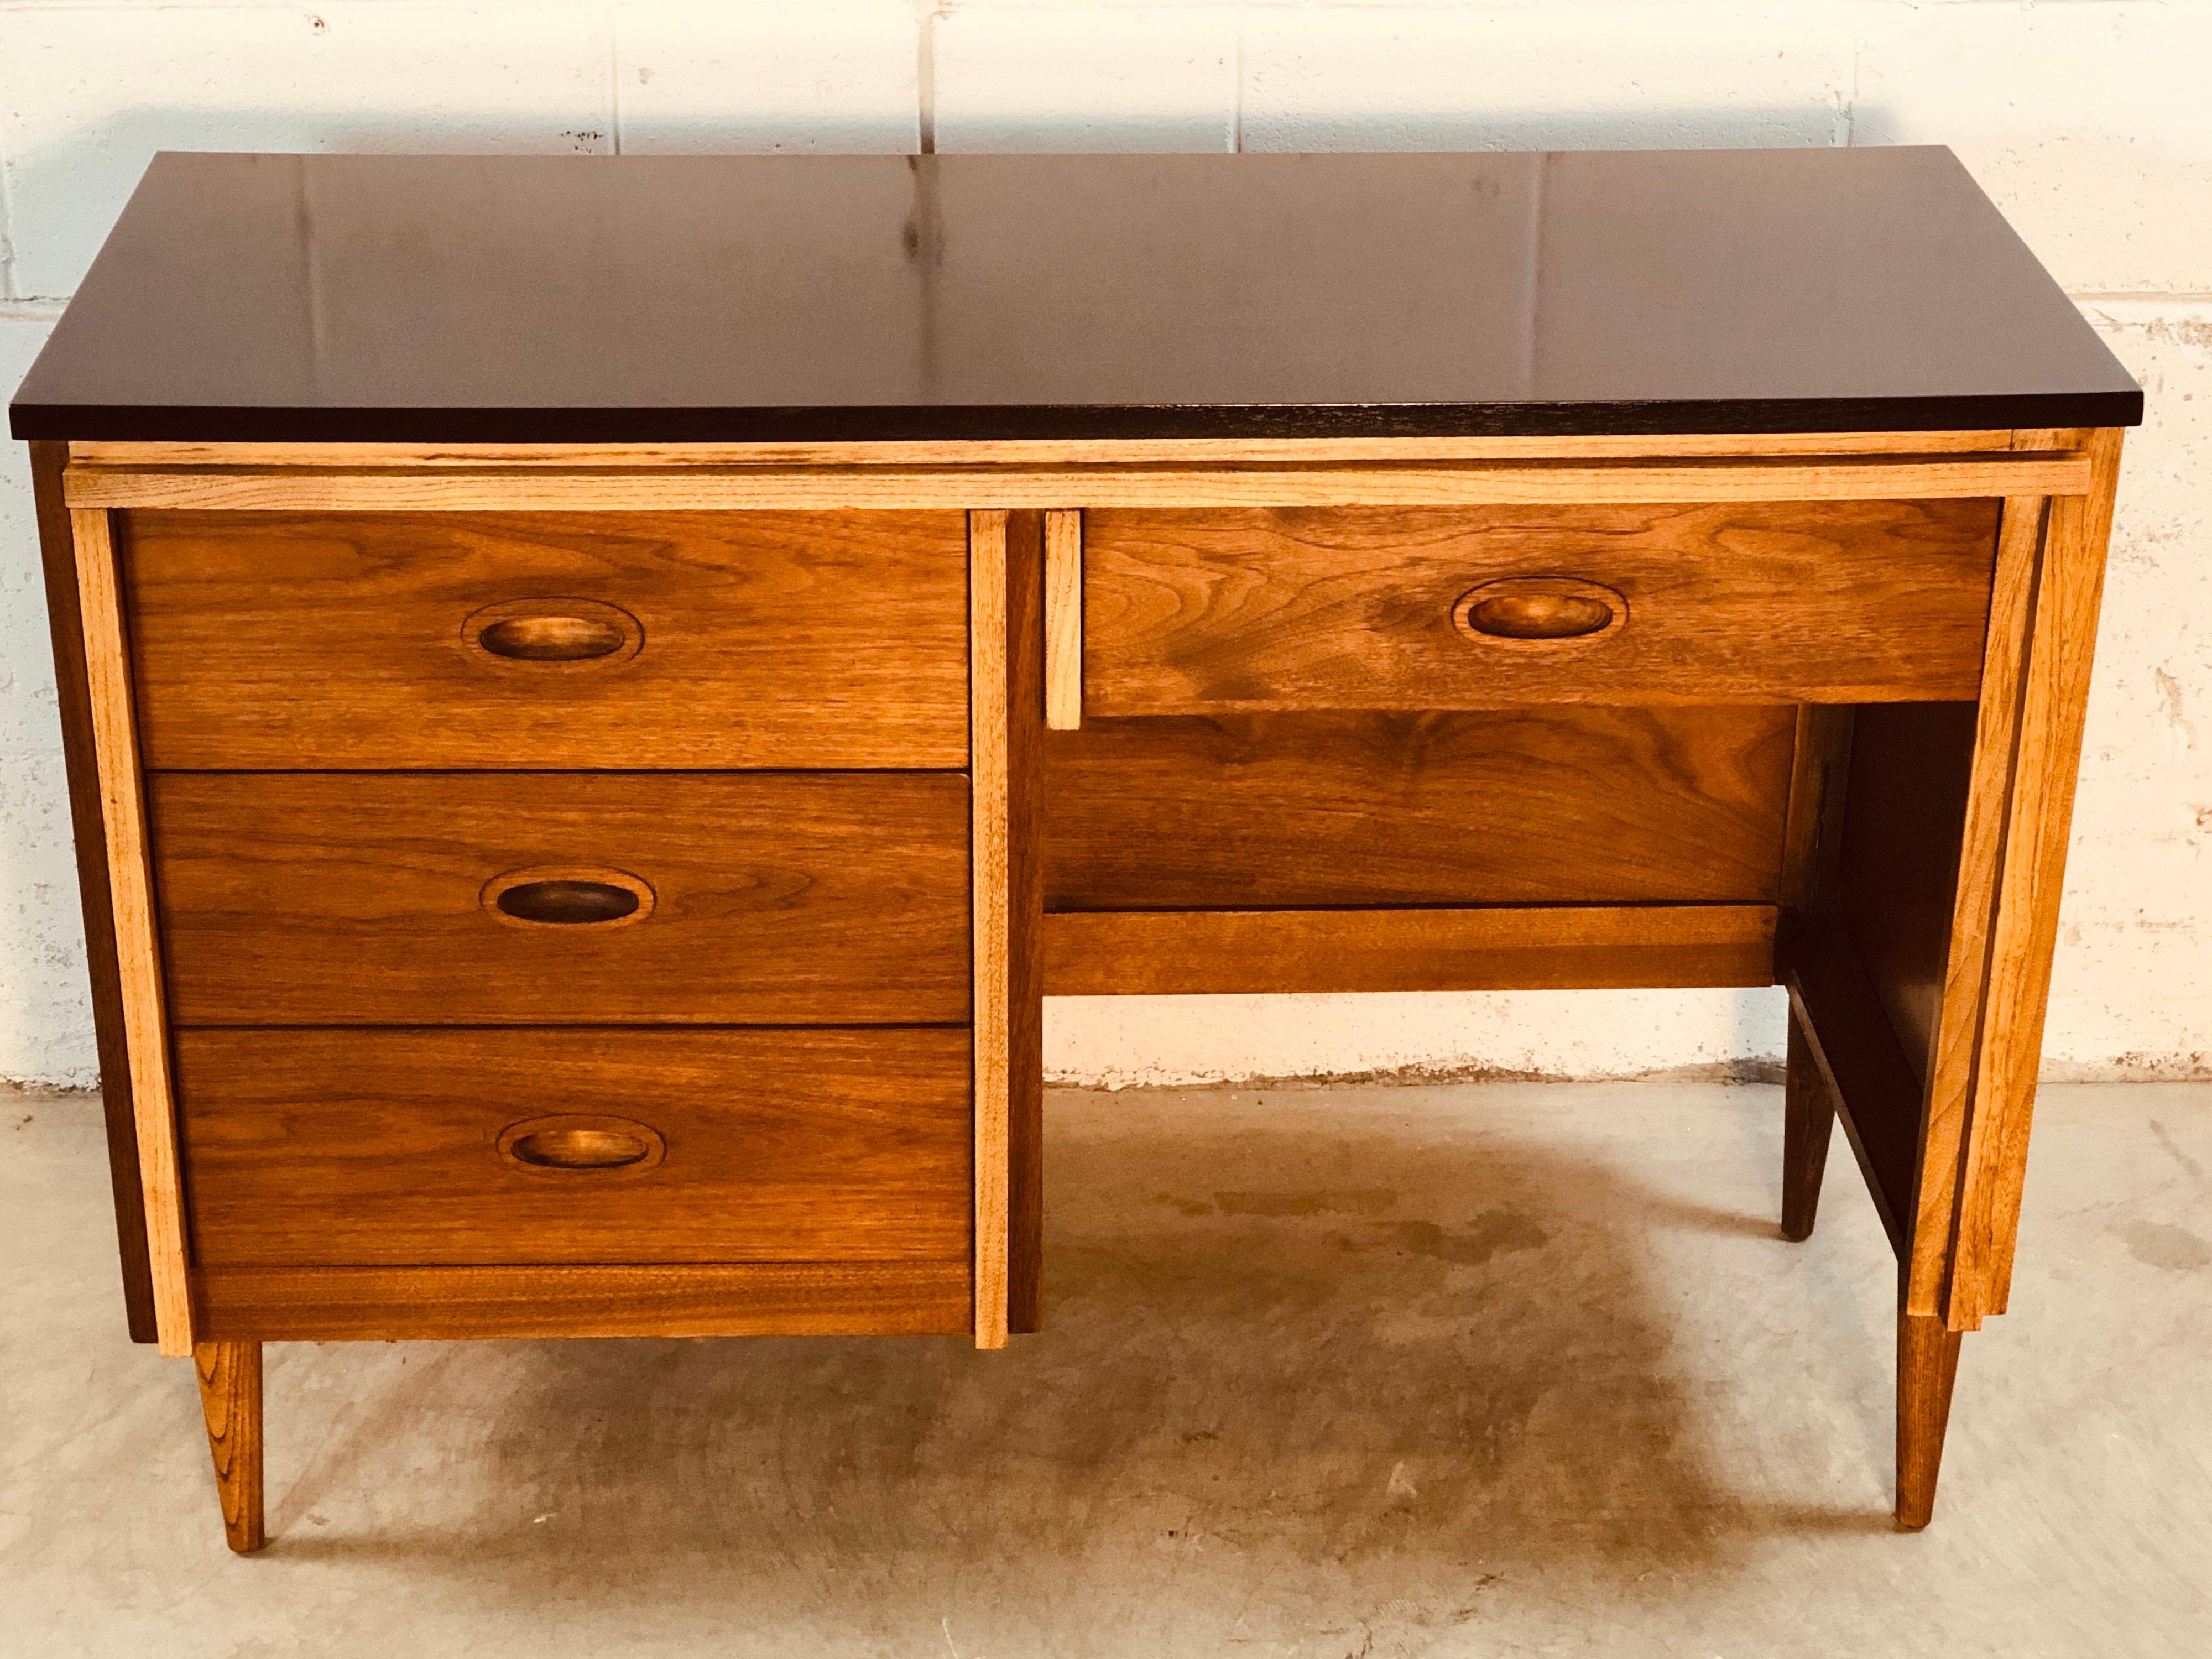 Vintage 1960s walnut and ashwood single stand desk by Dixie Furniture Co. The four-drawer desk has been fully restored and the desk top has been painted black. The desk has ash wood accents on the front and the legs. Knee hole is 20” L x 23” H.